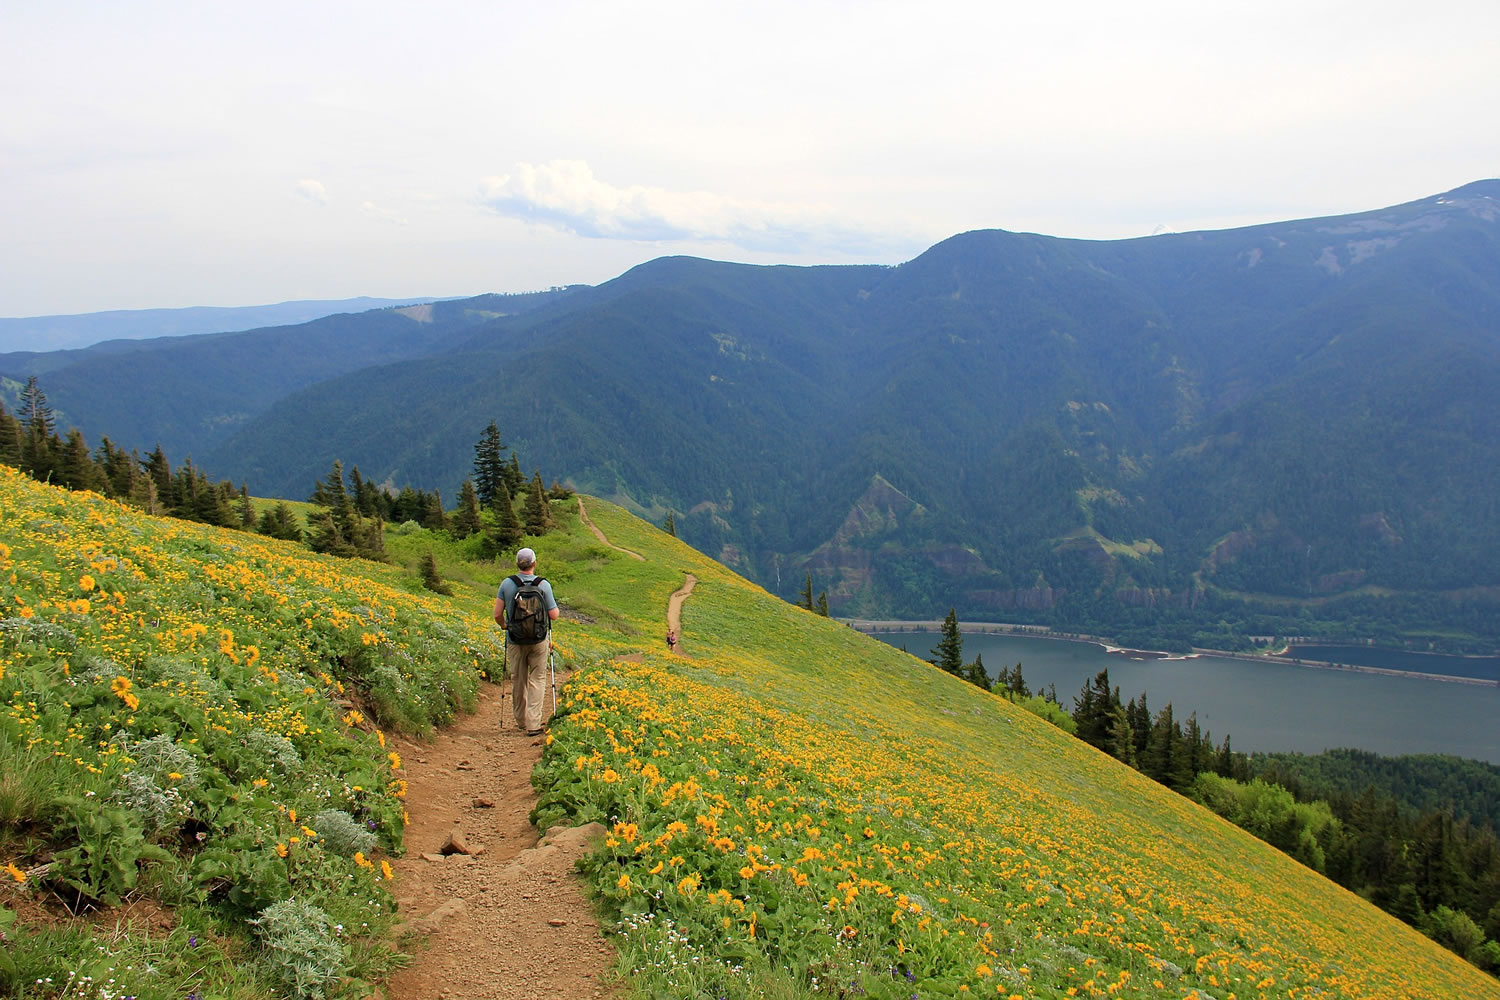 Dog Mountain, on the Washington side of the Columbia River Gorge, features a spectacular carpet of yellow balsamroot in May and early June.